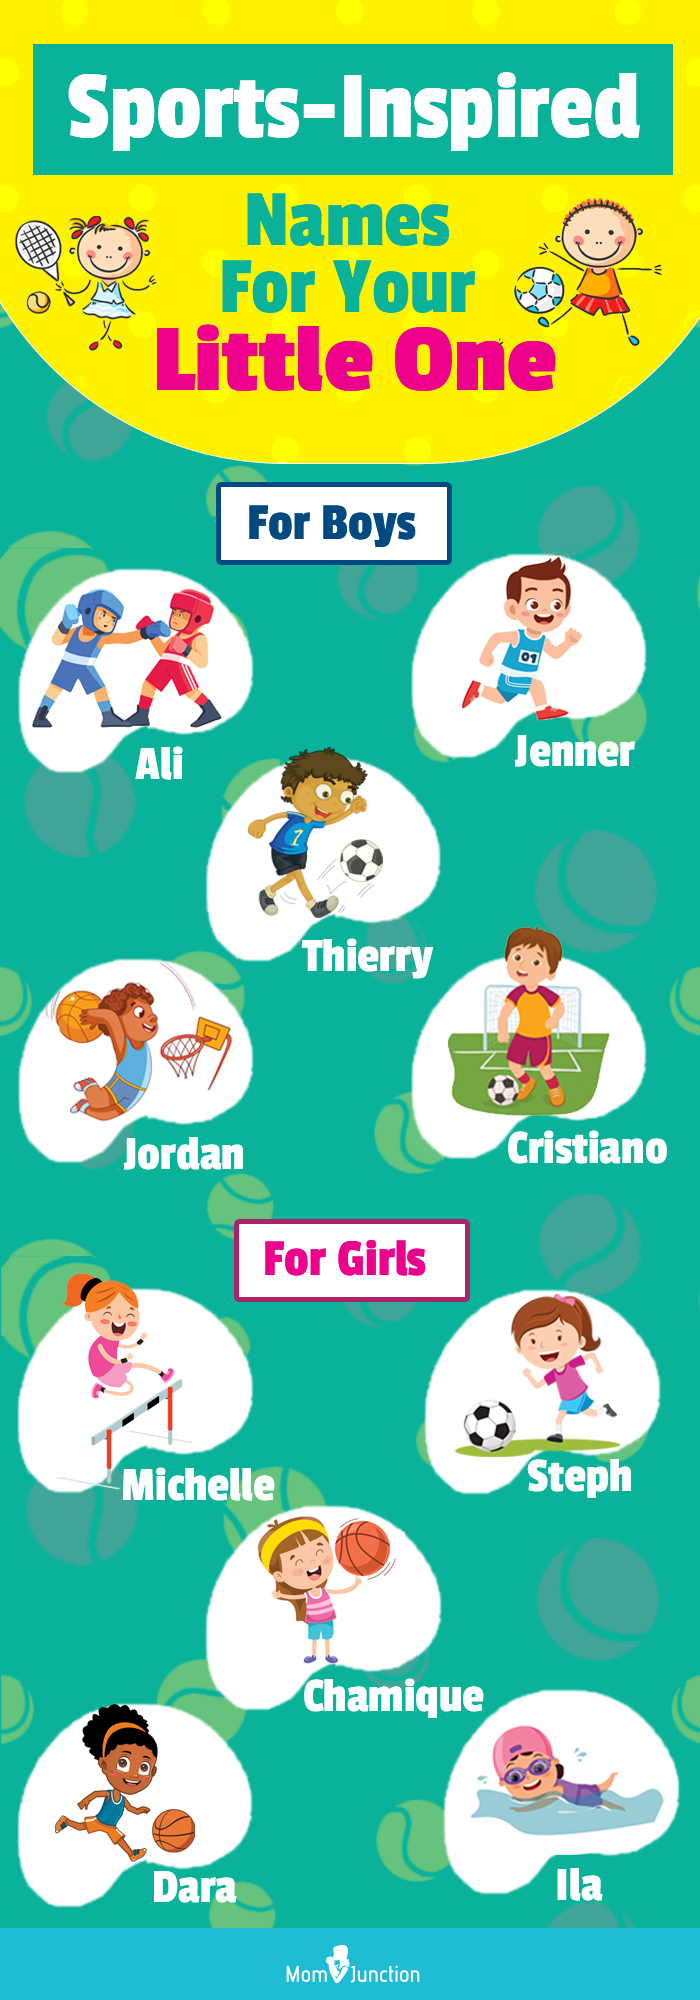 sports inspired names for your little one (infographic)